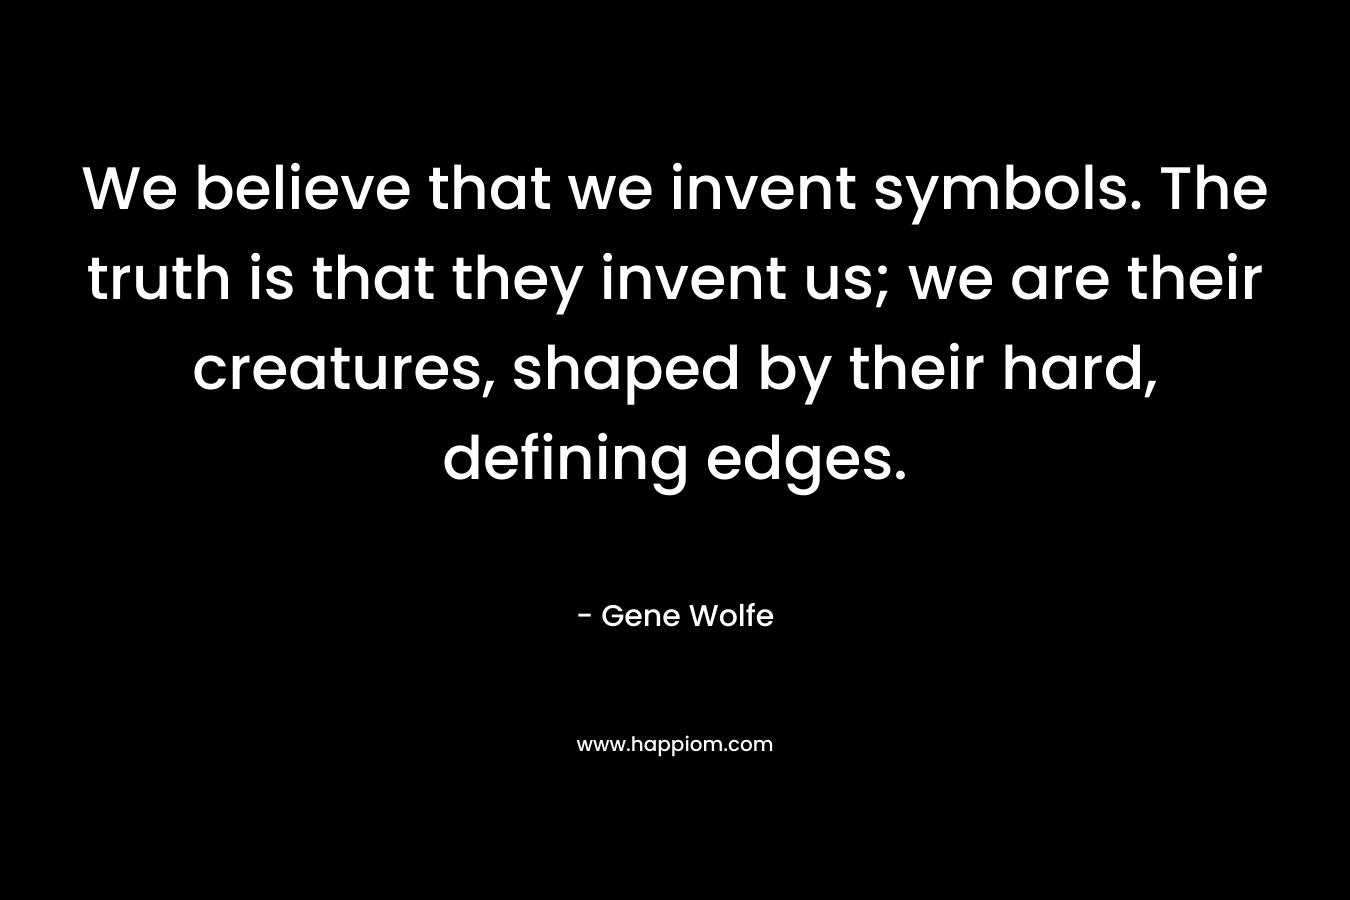 We believe that we invent symbols. The truth is that they invent us; we are their creatures, shaped by their hard, defining edges. – Gene Wolfe